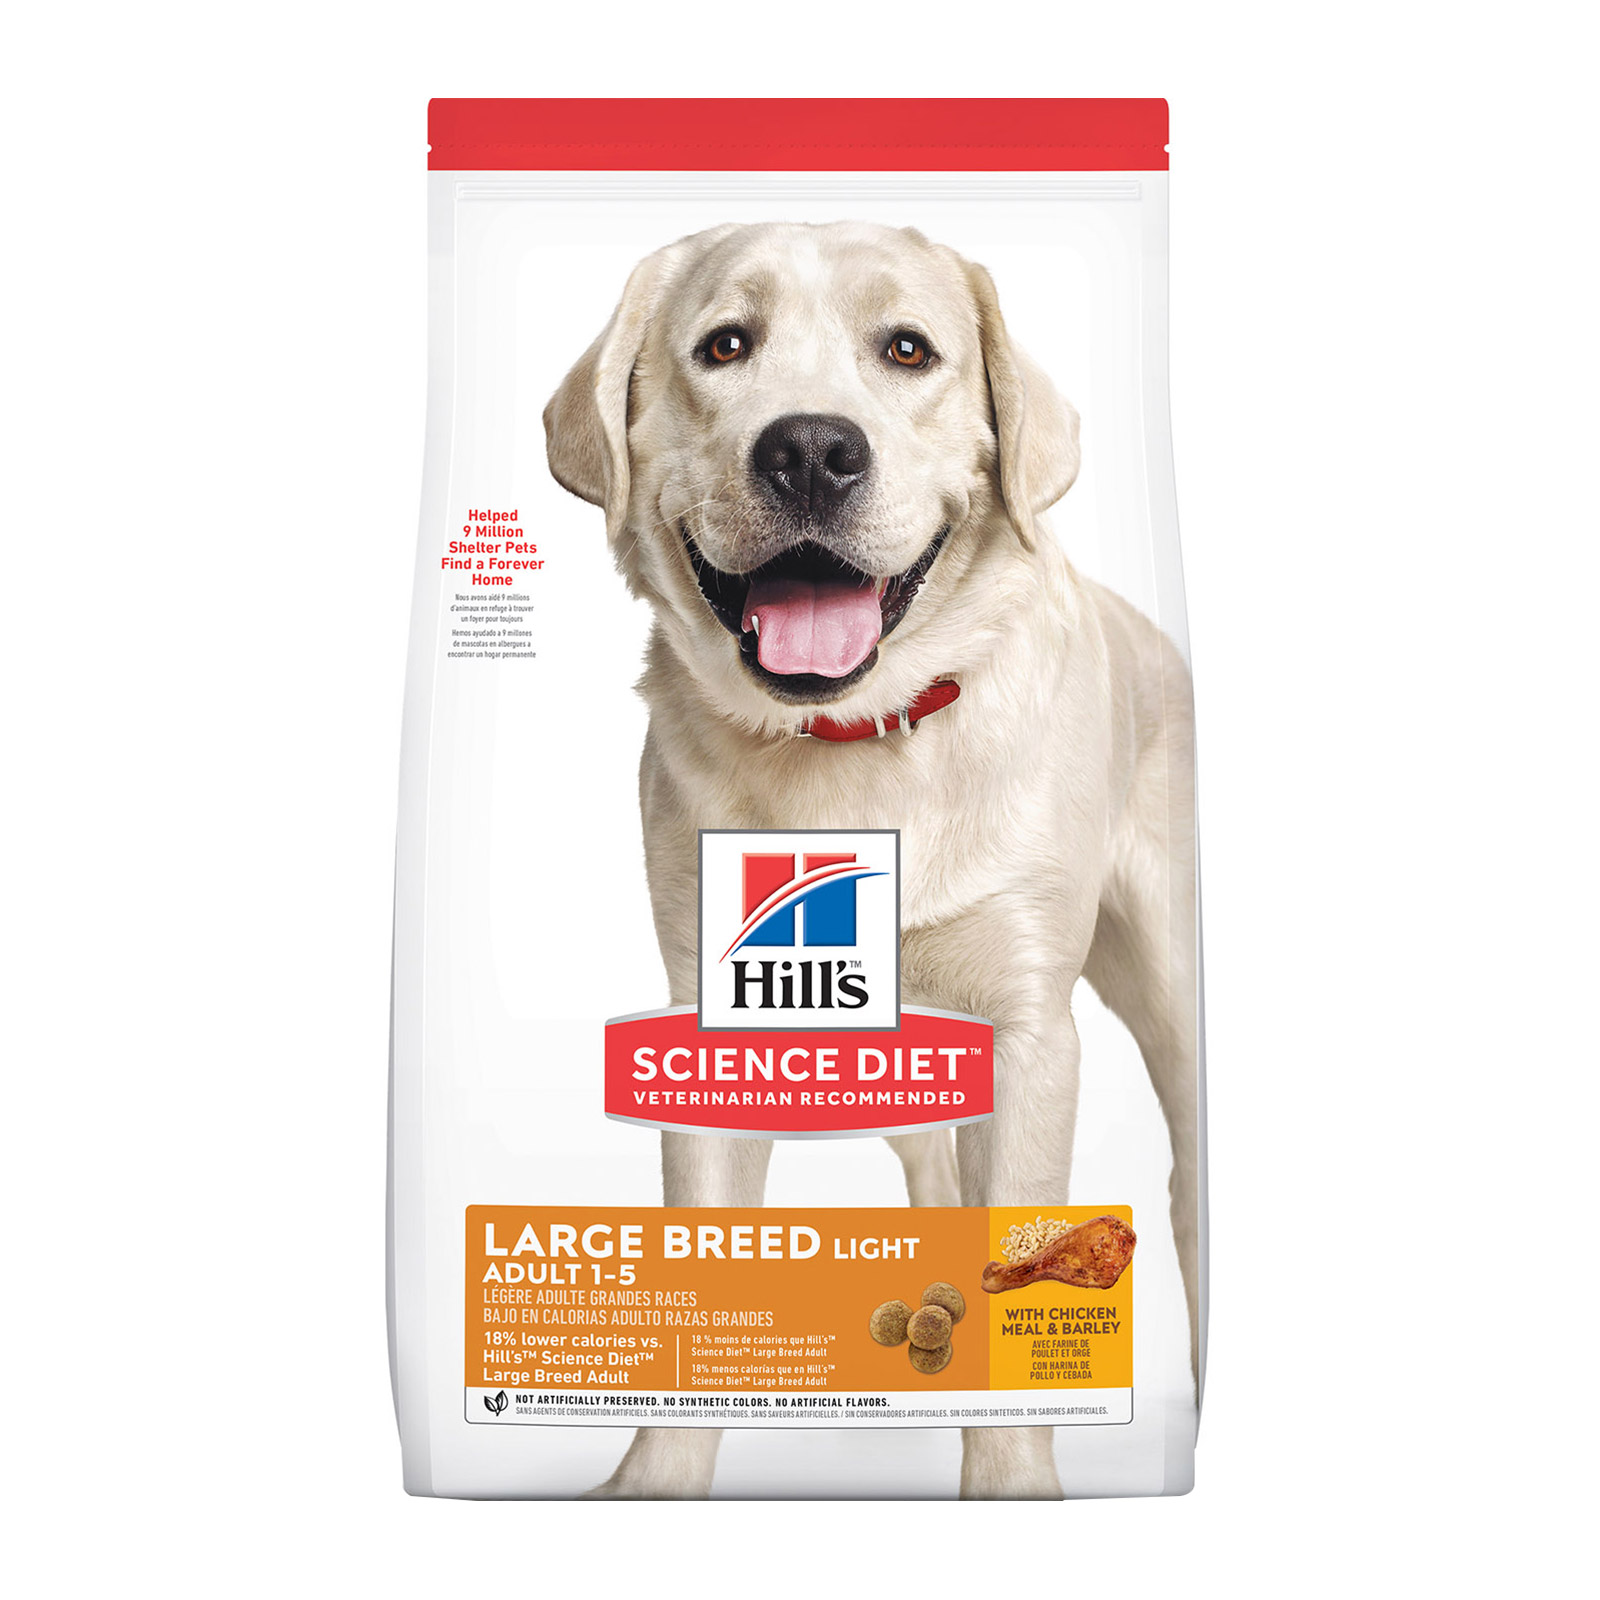 Hill's Science Diet Adult Light Large Breed with Chicken Meal & Barley Dry Dog Food for Food